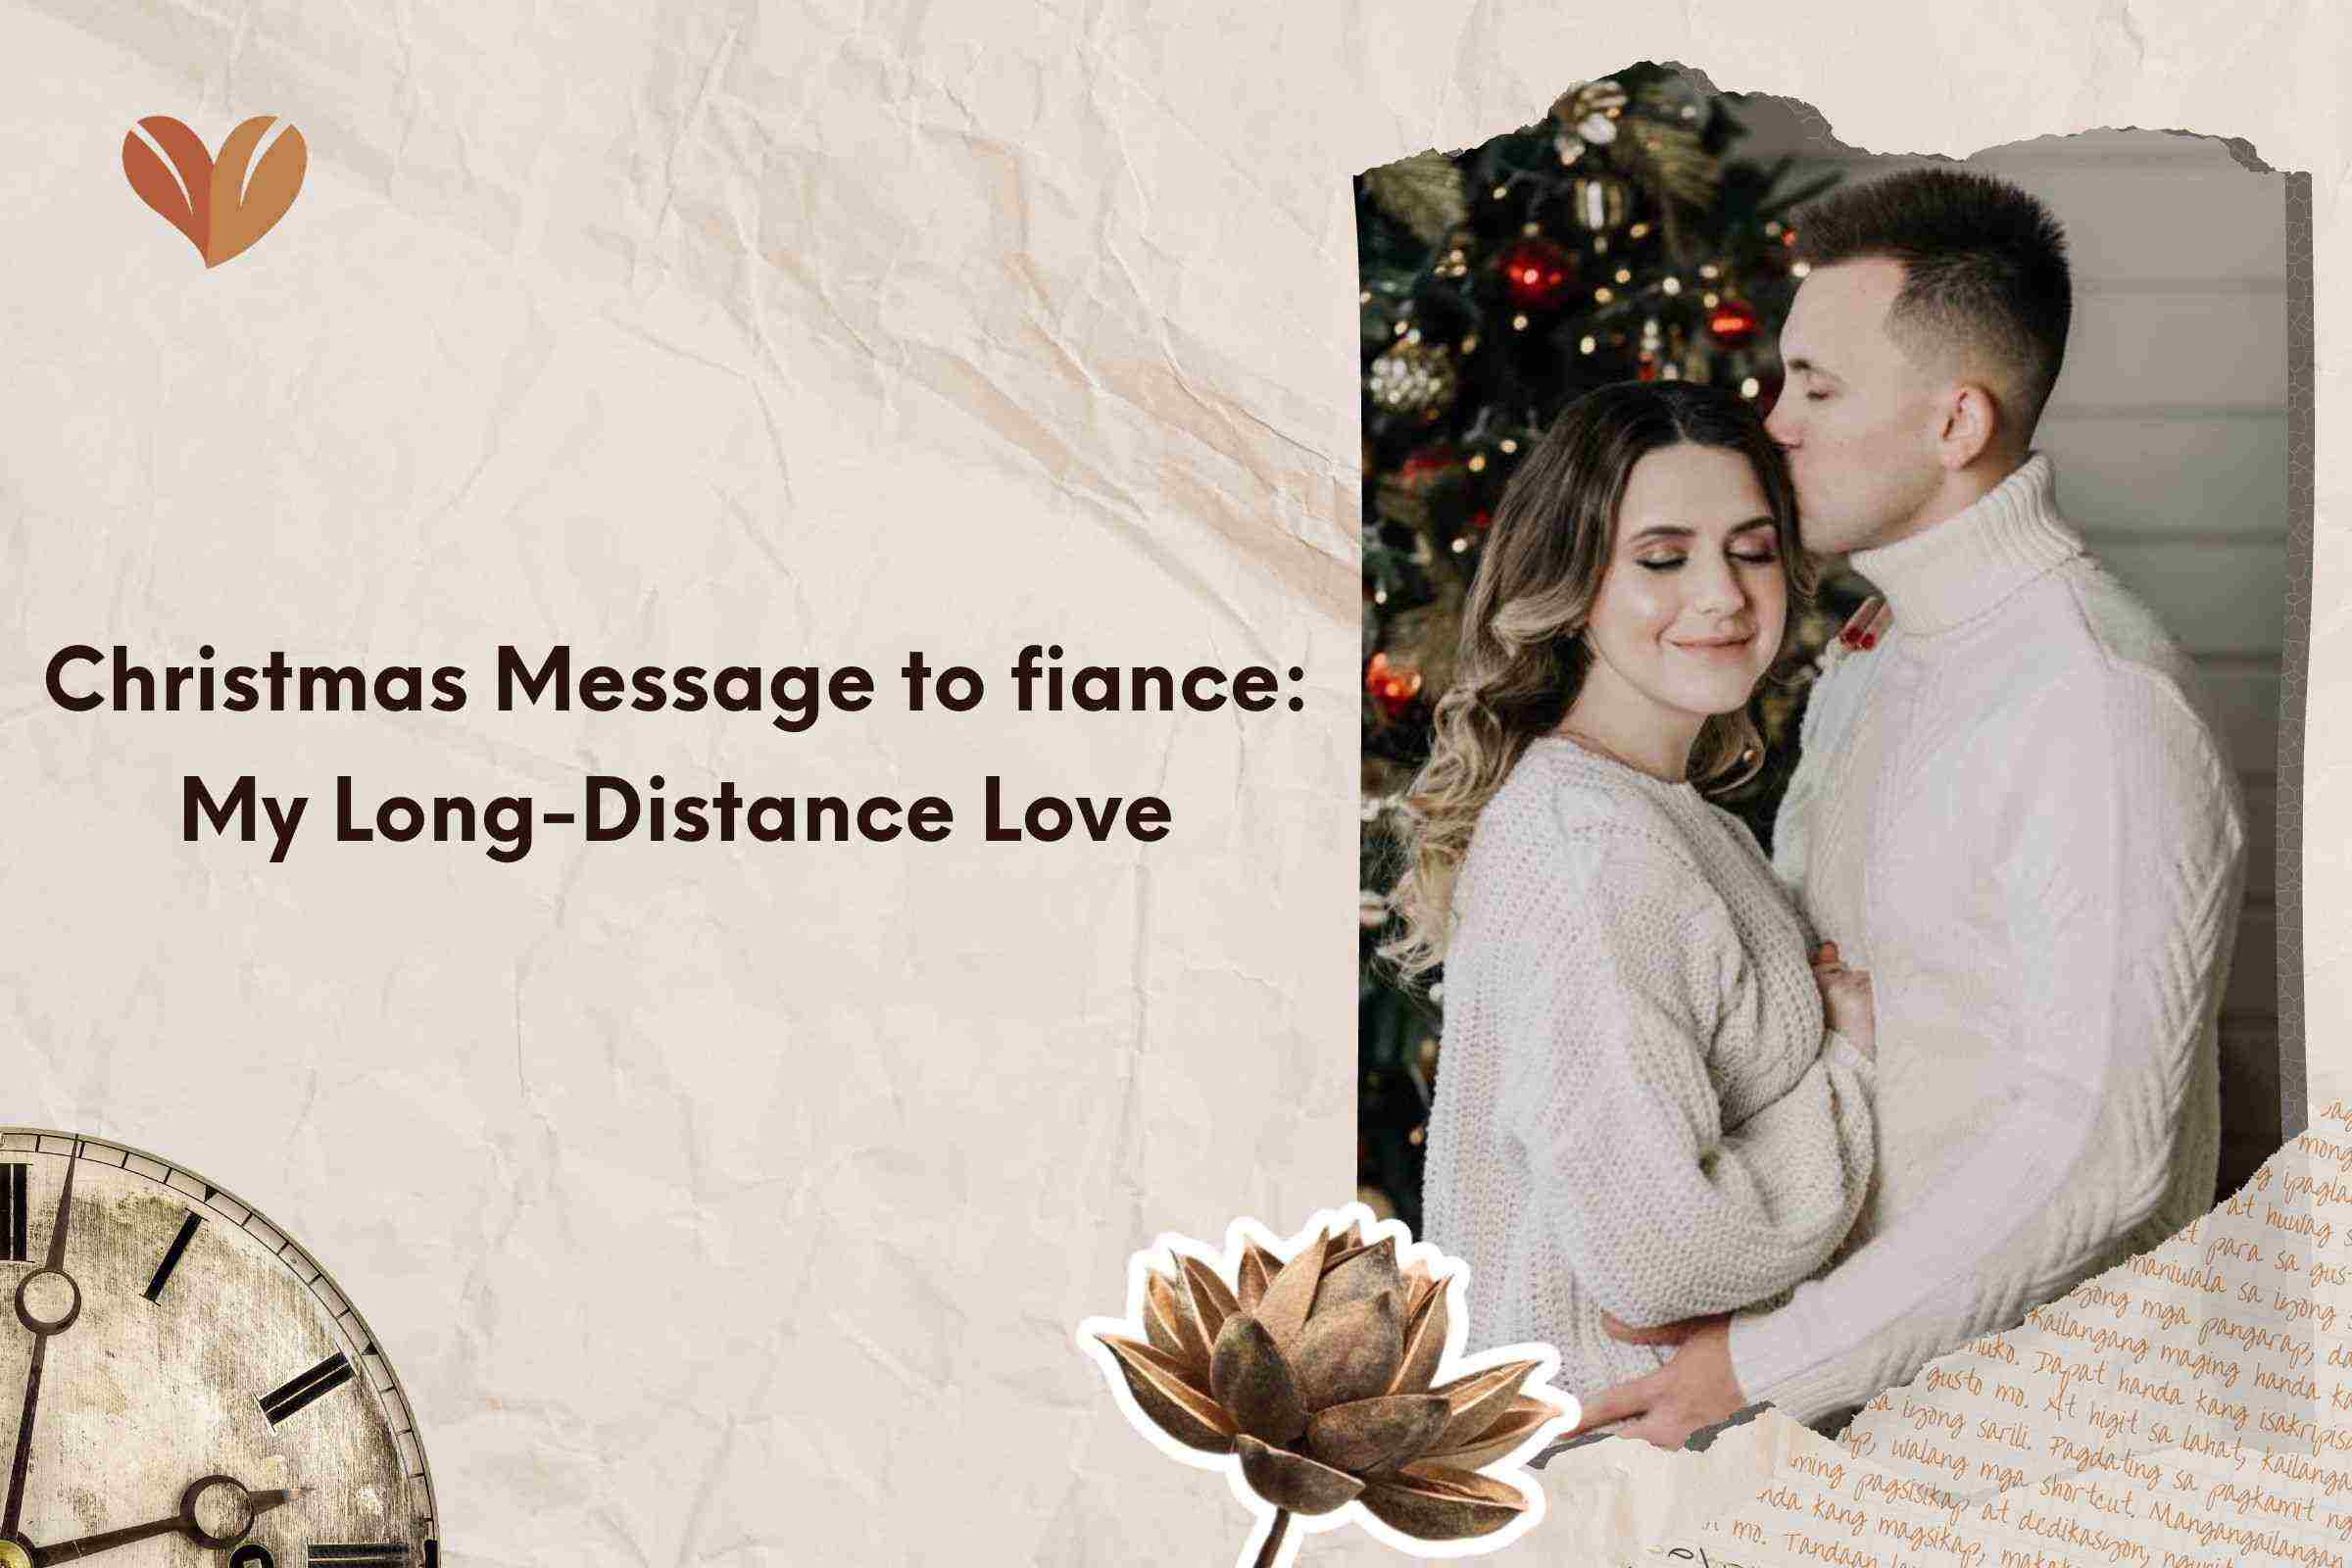 Christmas Message to fiance: My Long-Distance Love